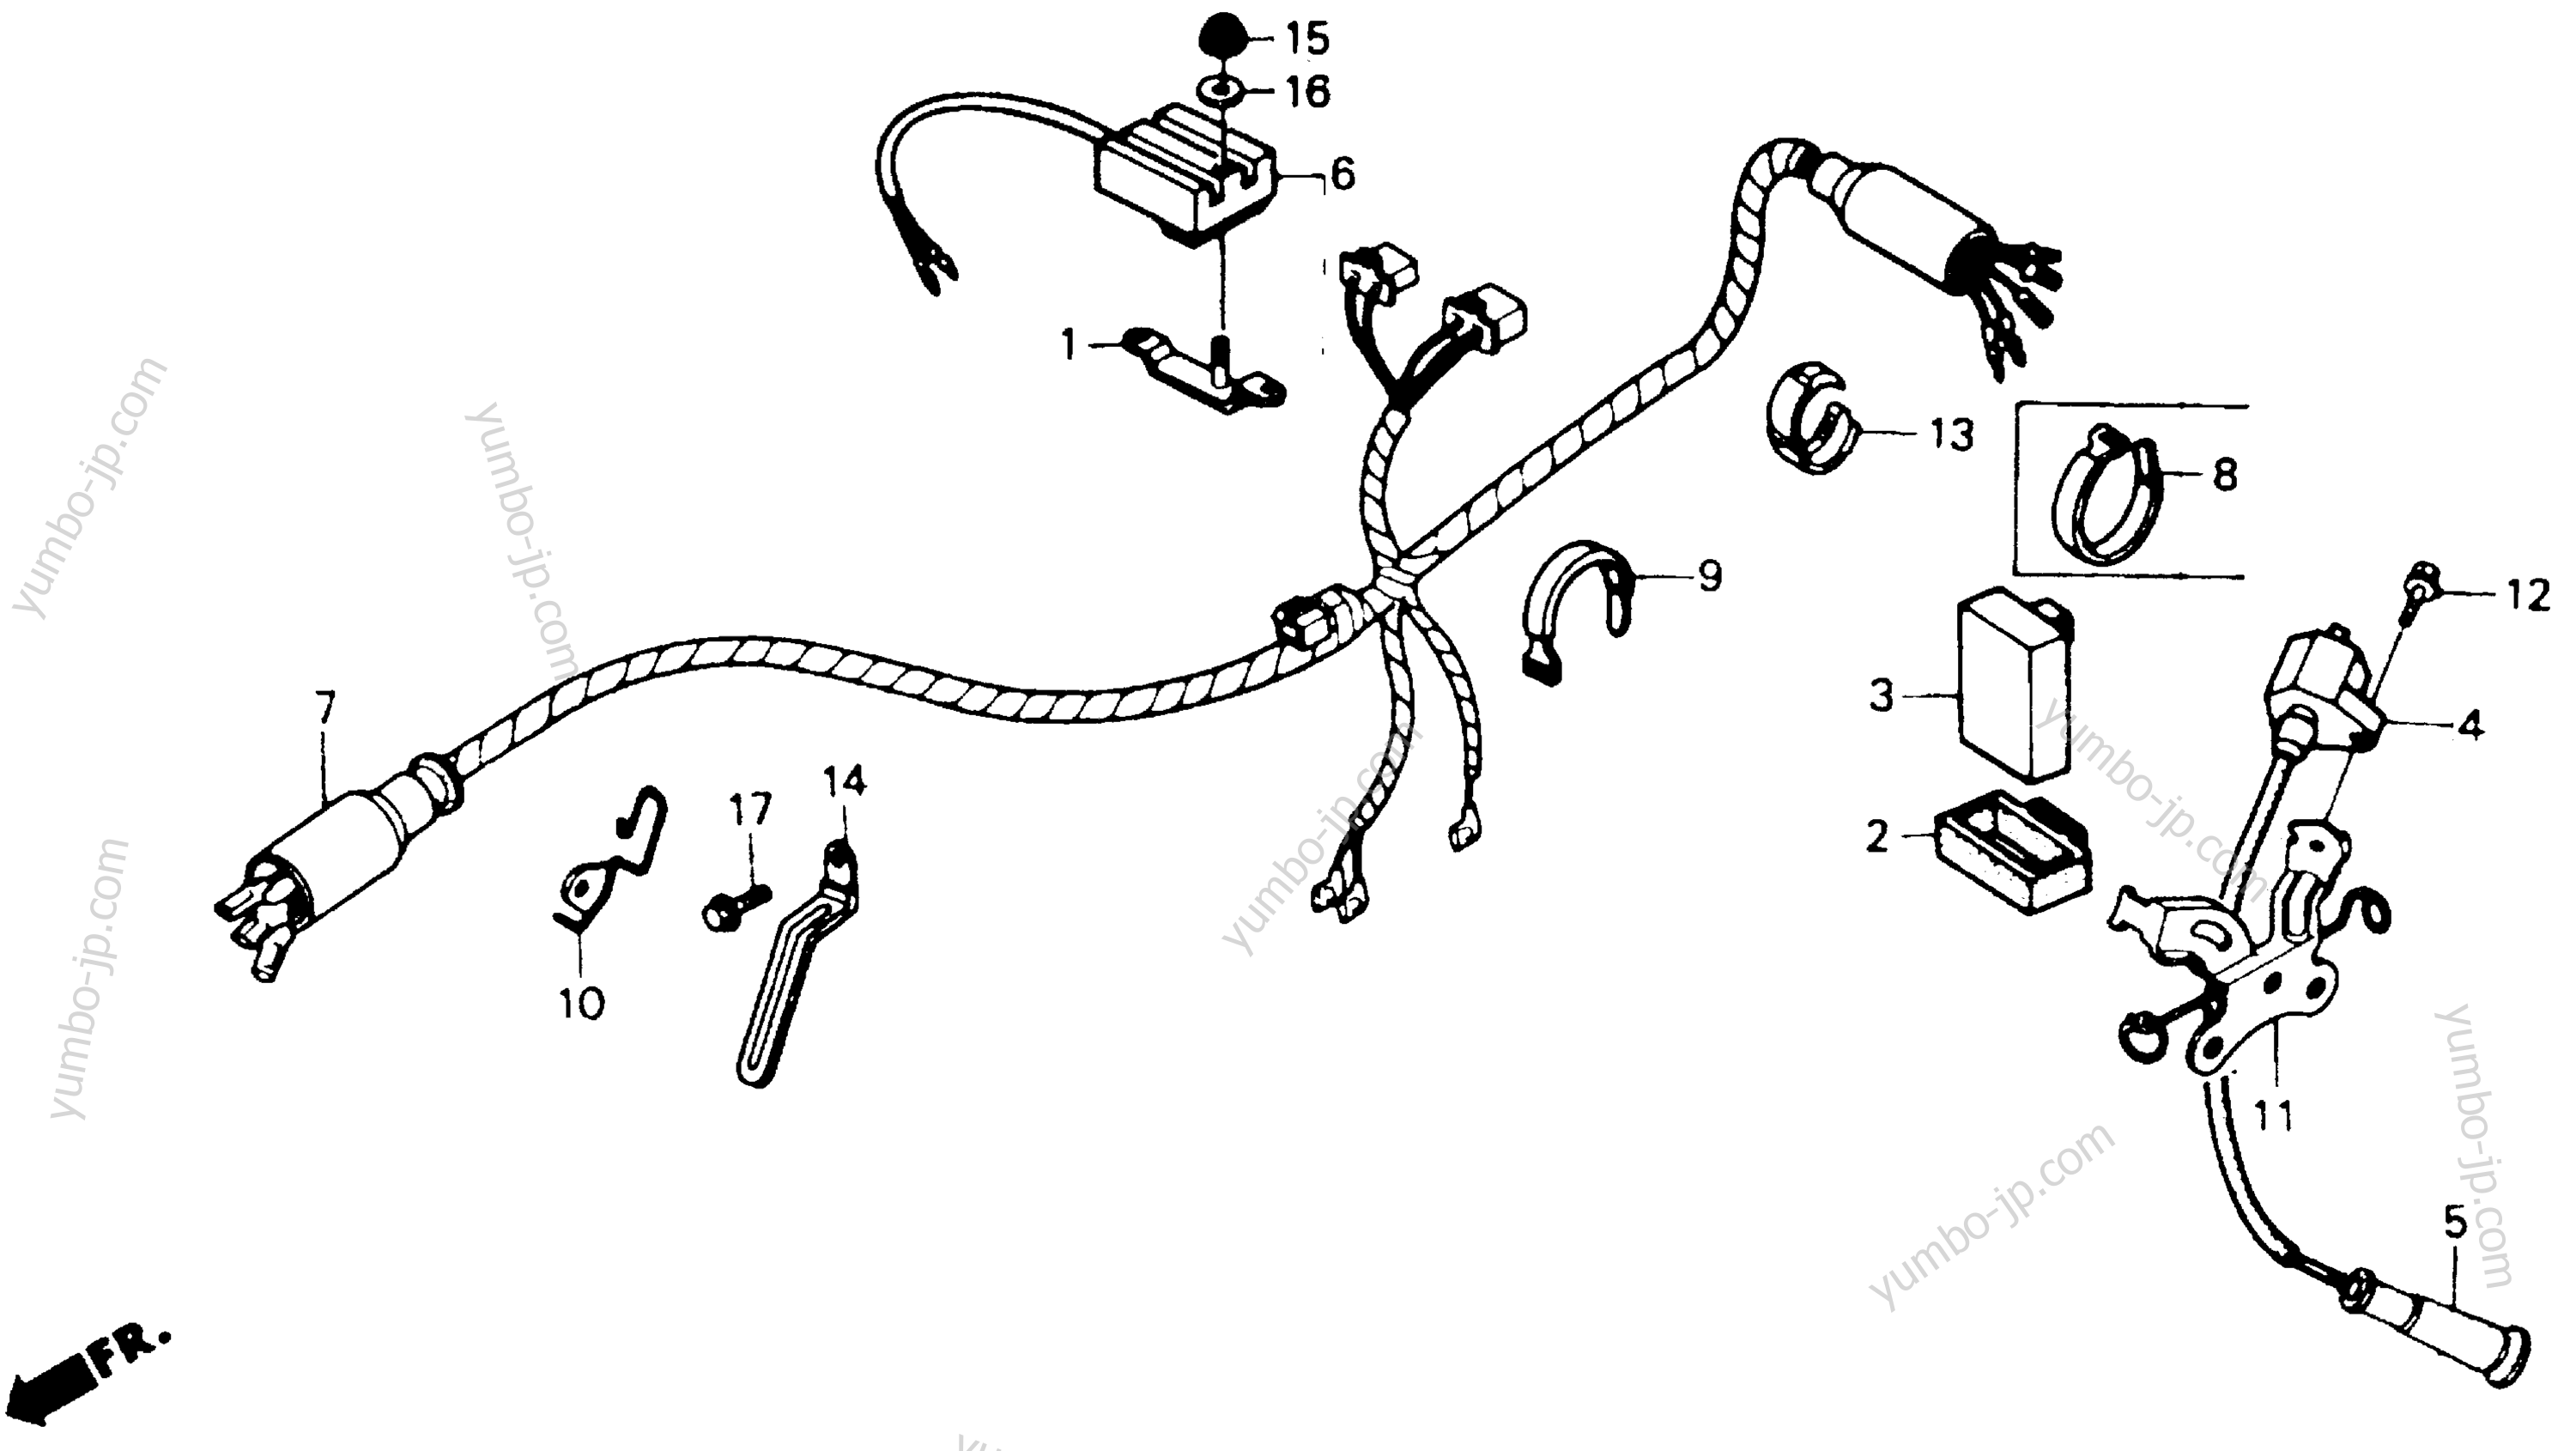 WIRE HARNESS for motorcycles HONDA XR600R A 1987 year